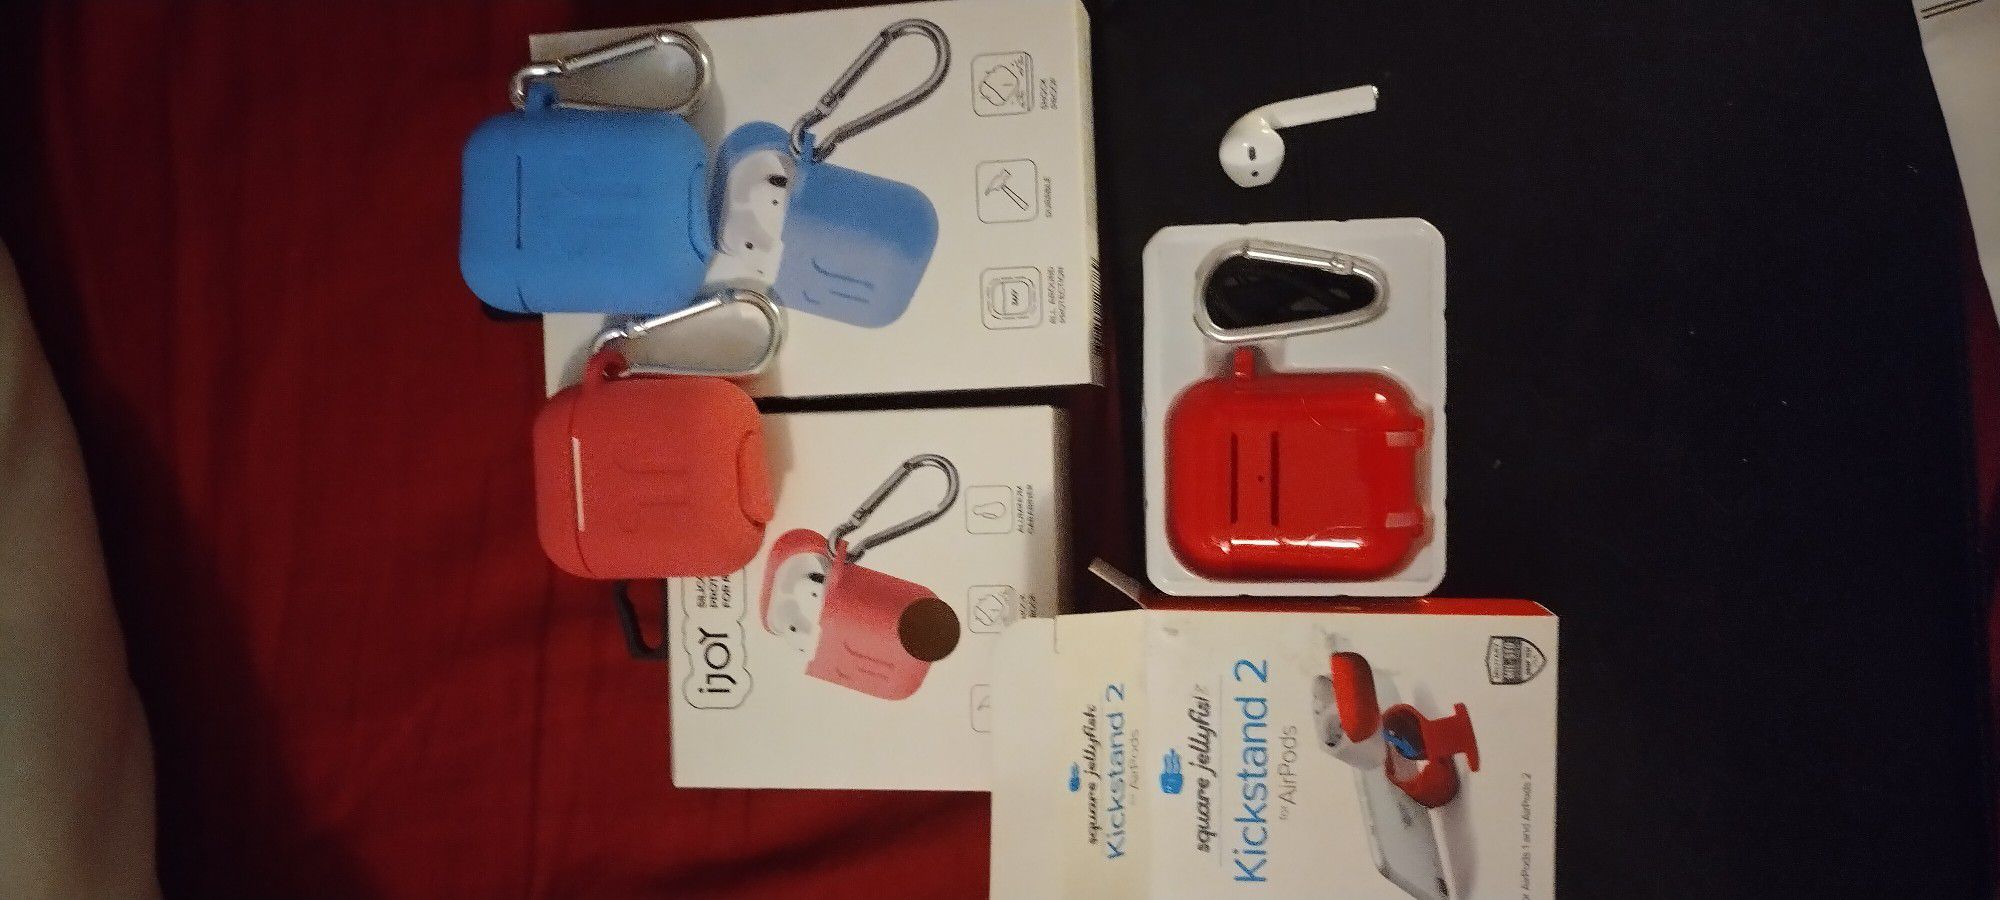 Airpod Earbuds Package Two Airpod Earbuds Wñith Silicone Case PLUS Red Kickstand Case Withhook Plus Extra "R" airpod Earbud 